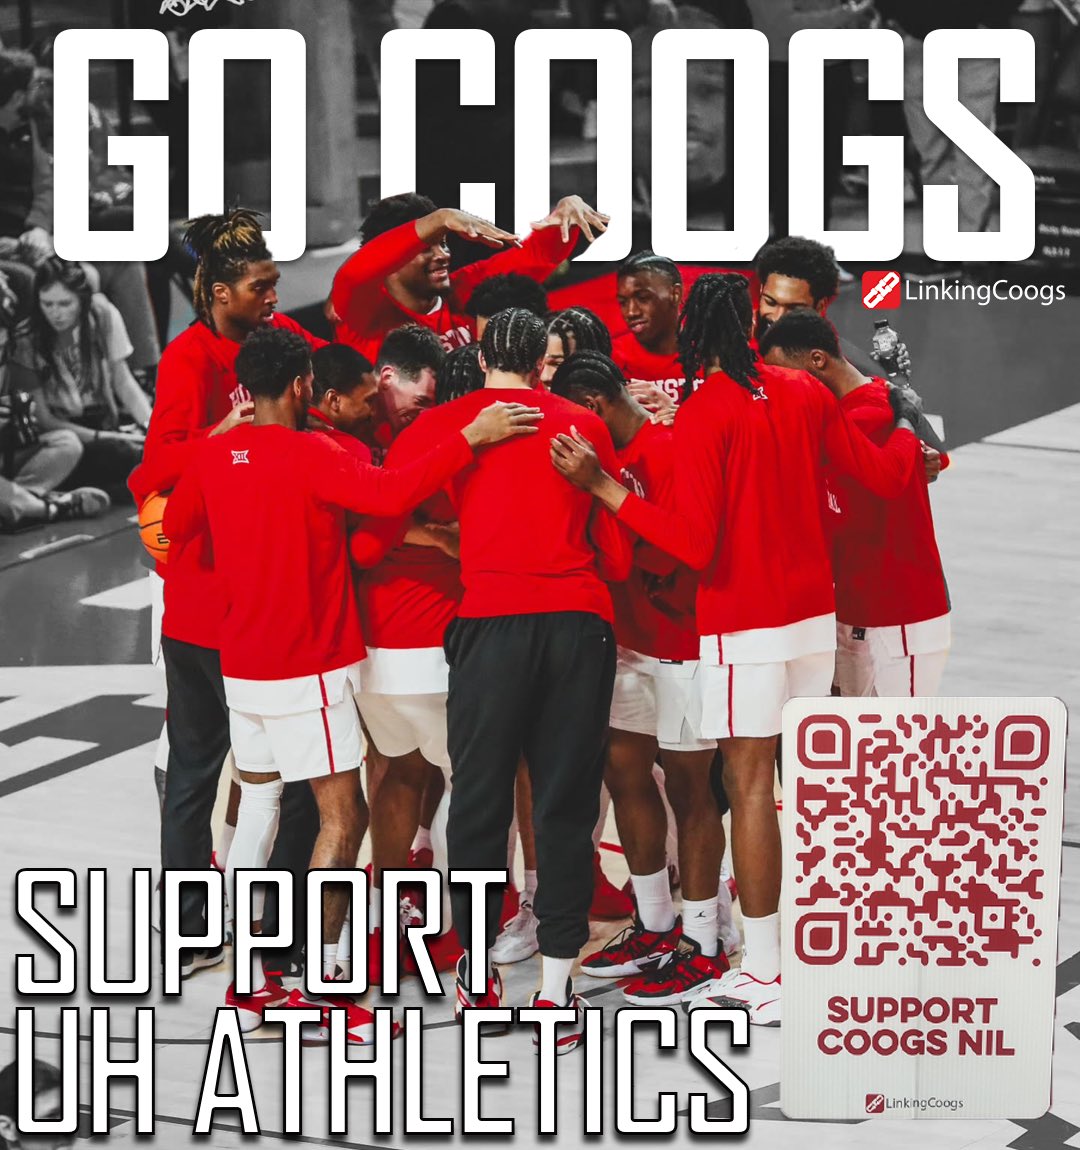 COOG FANS!! In honor of a very special week, ALL of @UHCougars need your support in this ever-changing new era of college sports. NIL is vital to the continued success & standard at the University of Houston. Scan the QR code below and get involved. We need & appreciate you. 🫶❤️